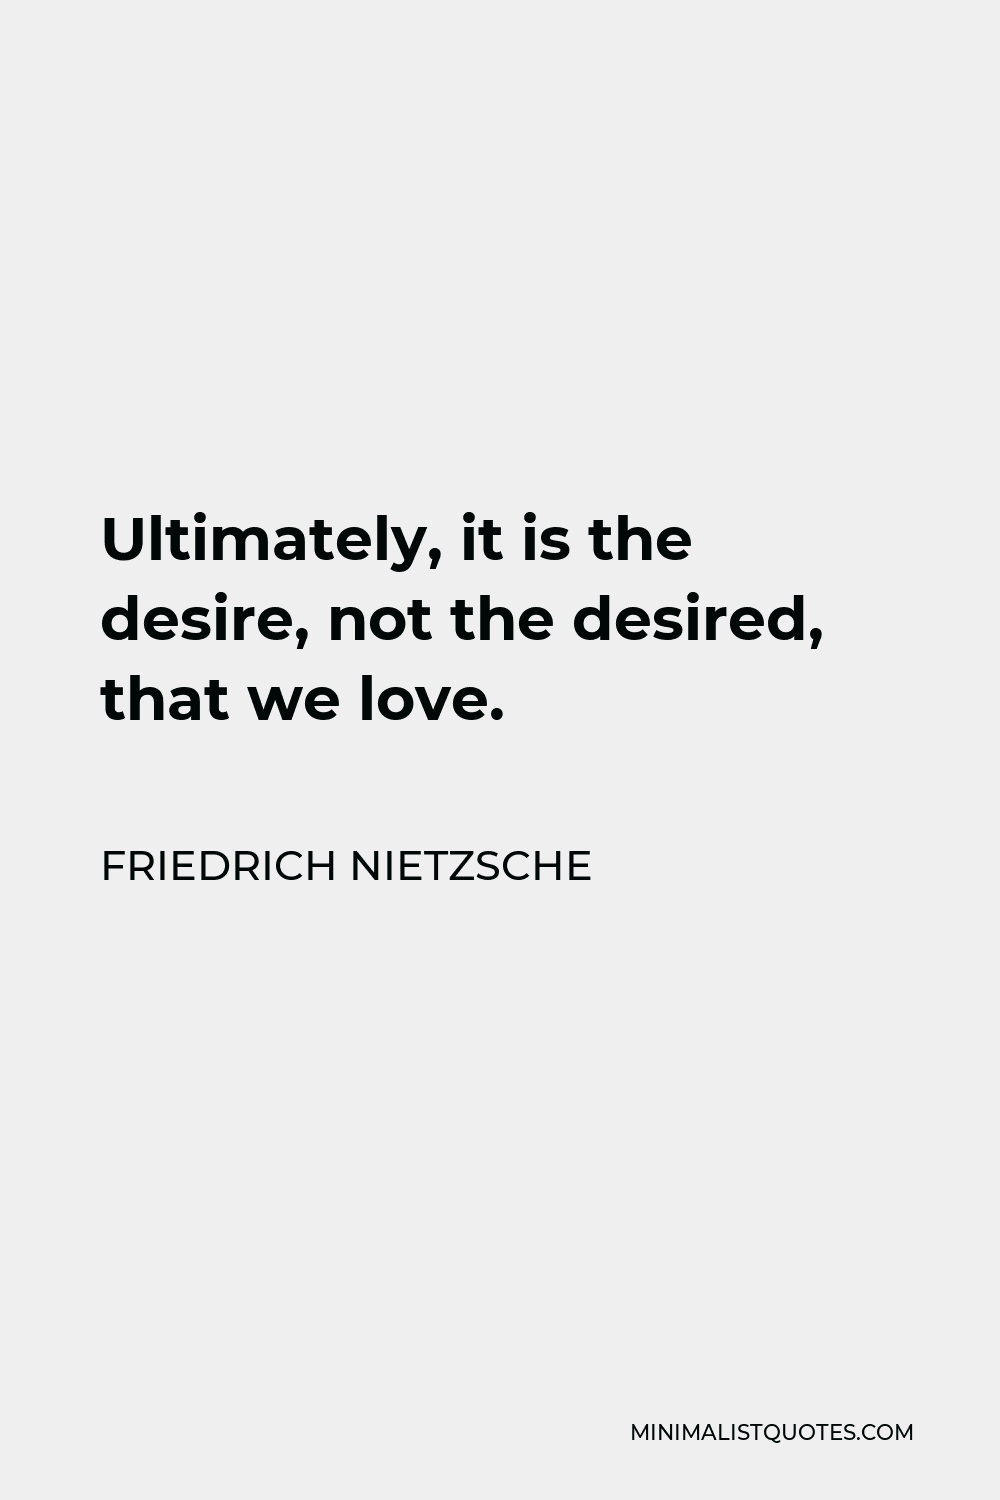 Friedrich Nietzsche Quote - Ultimately, it is the desire, not the desired, that we love.